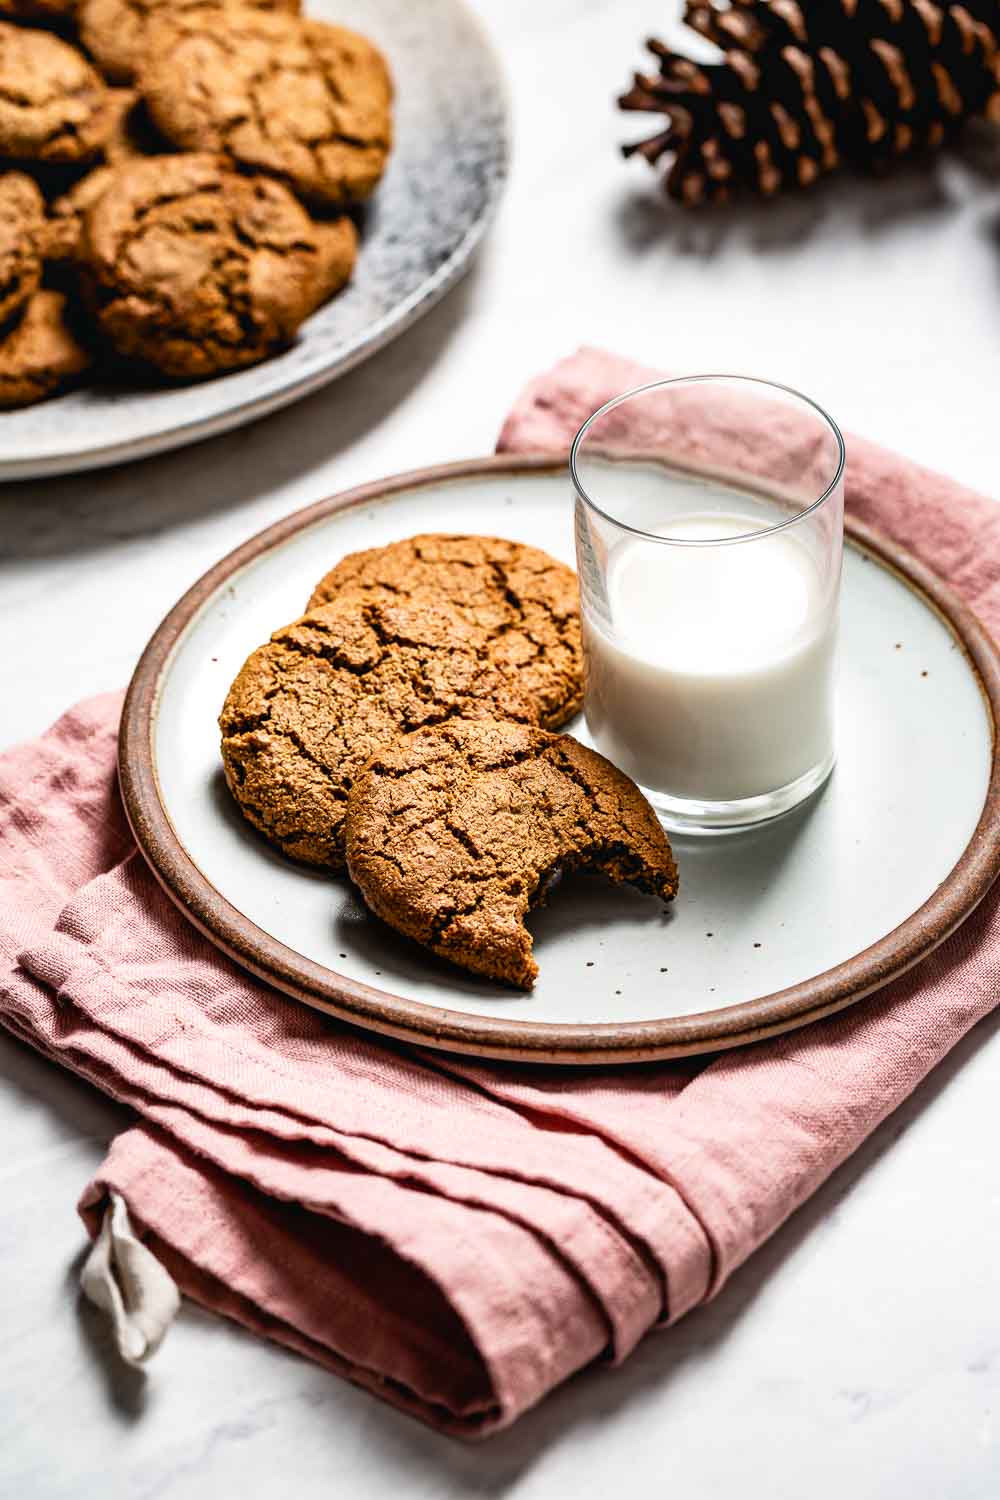 A few Almond flour gingerbread cookies served with a glass of milk on the side.